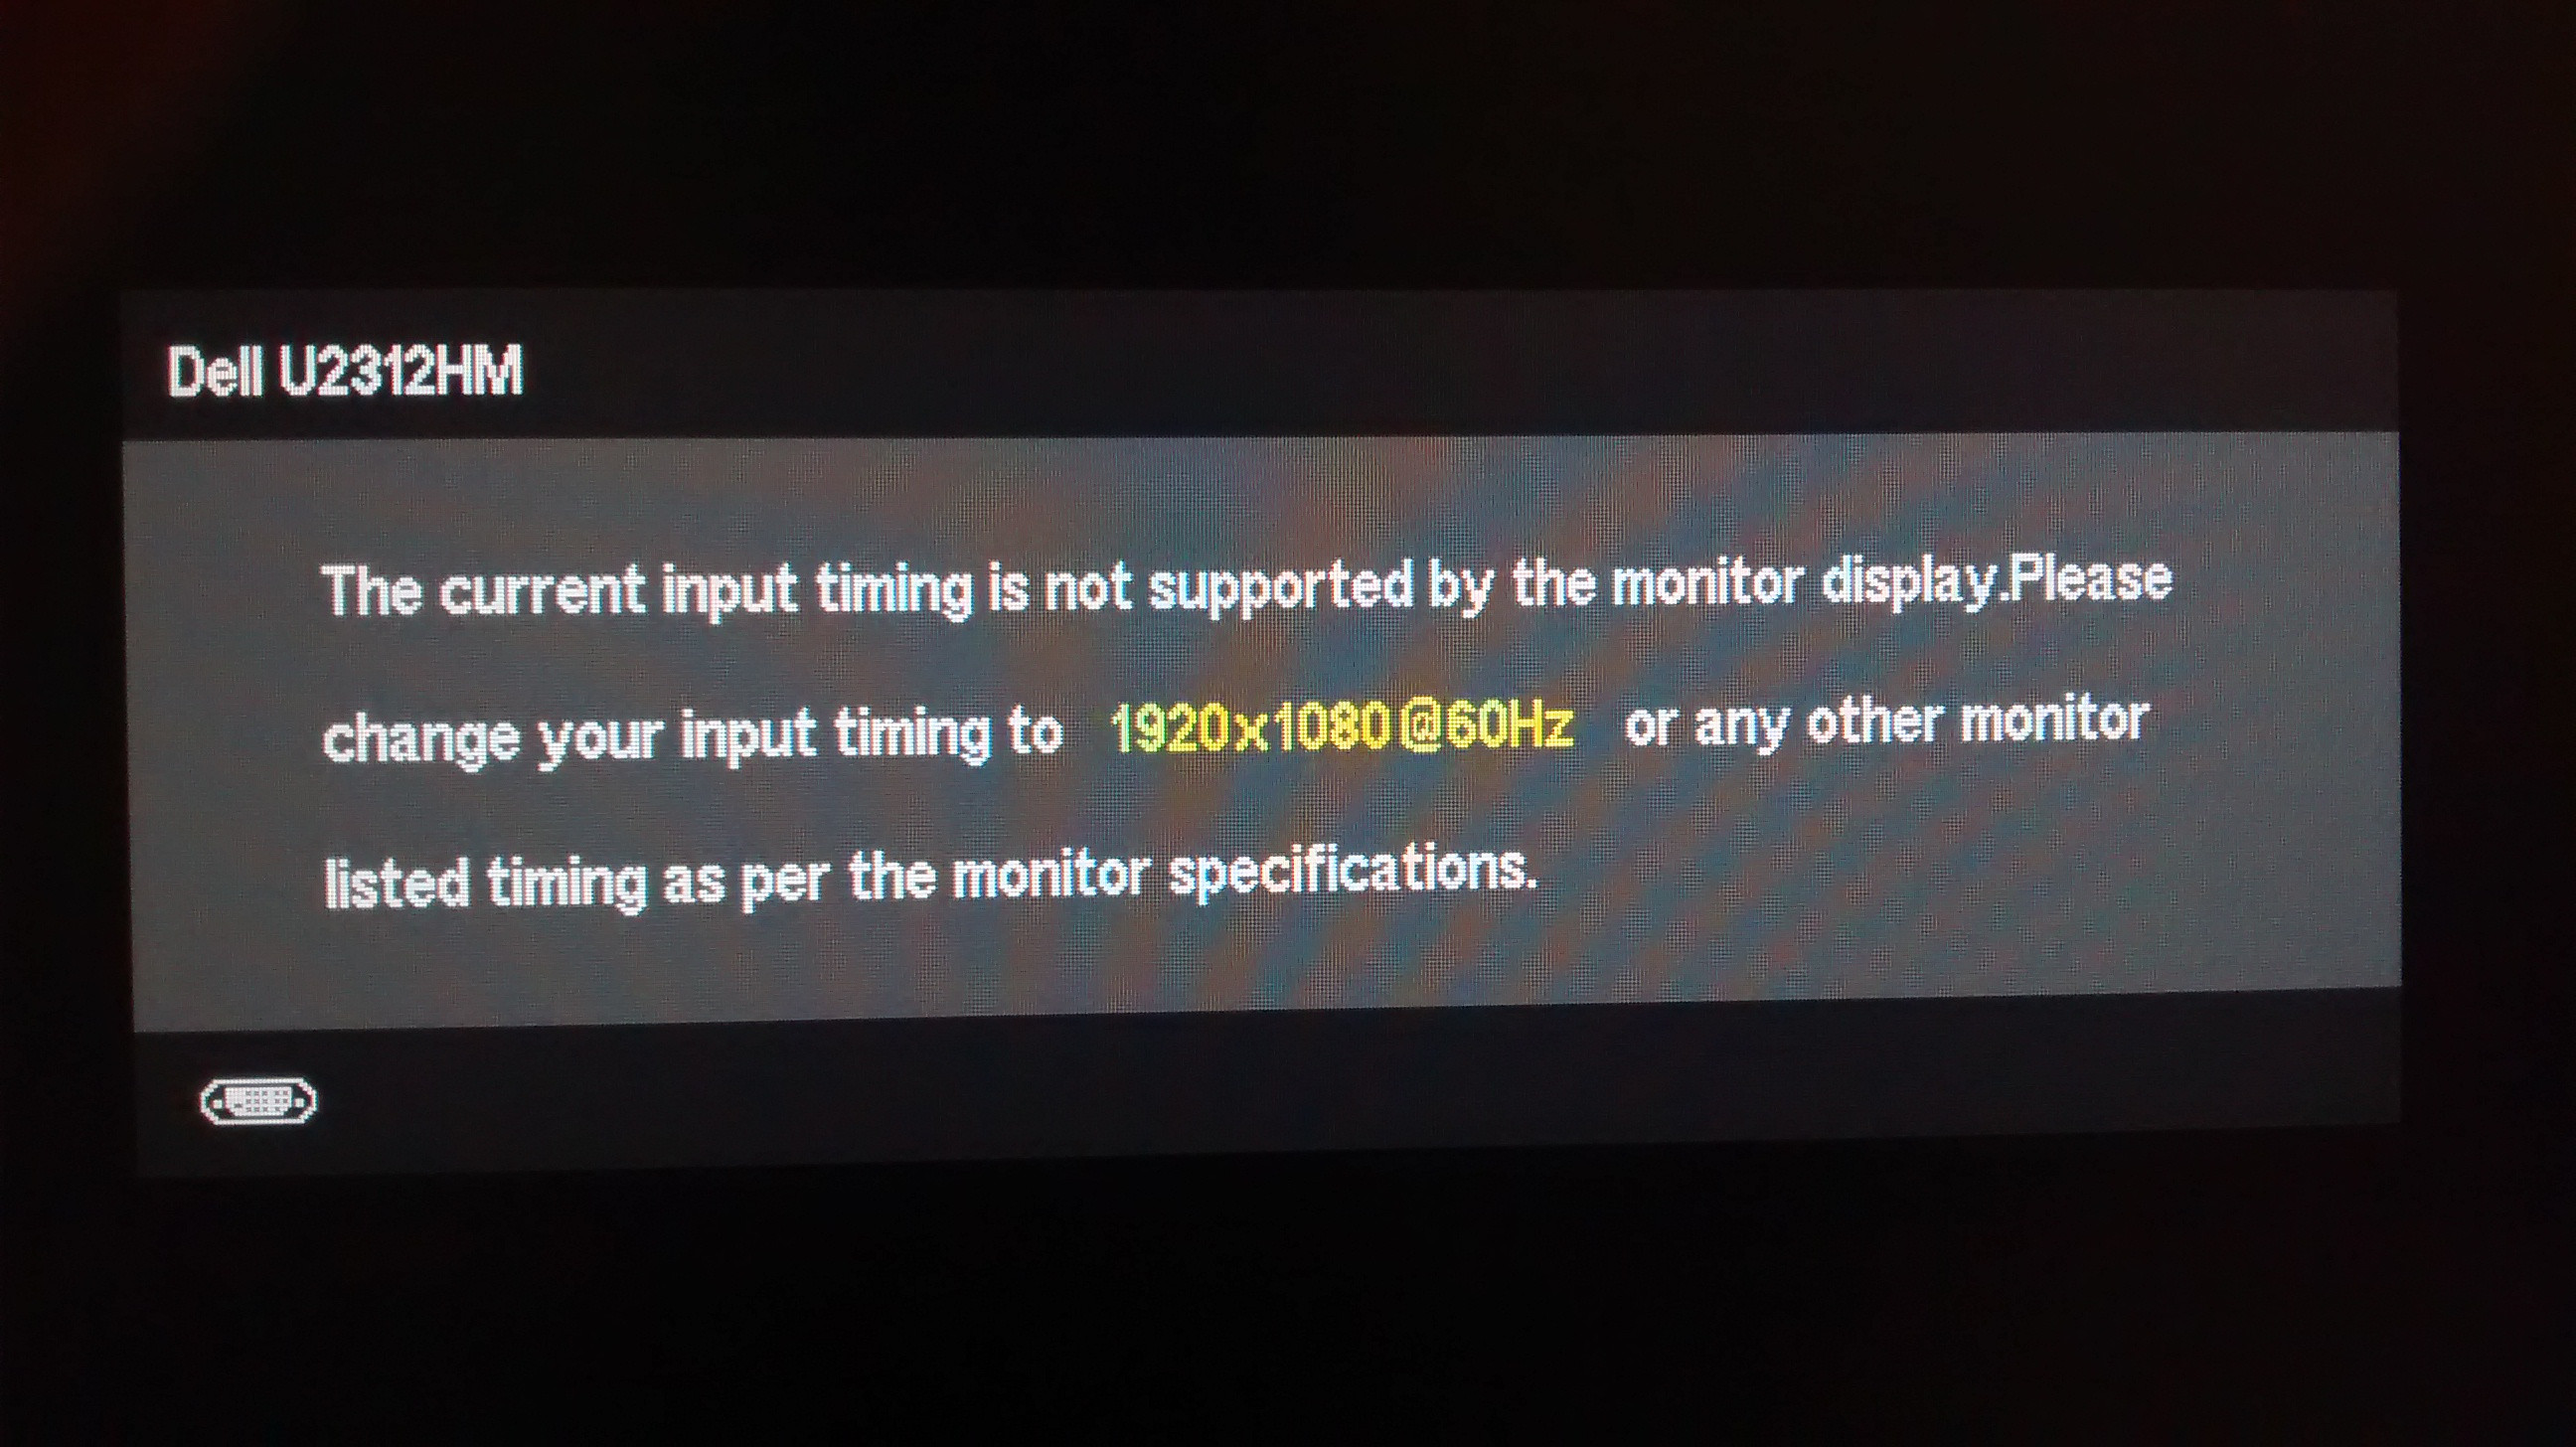 How to Fix The current input timing isn't supported? [Fixed]